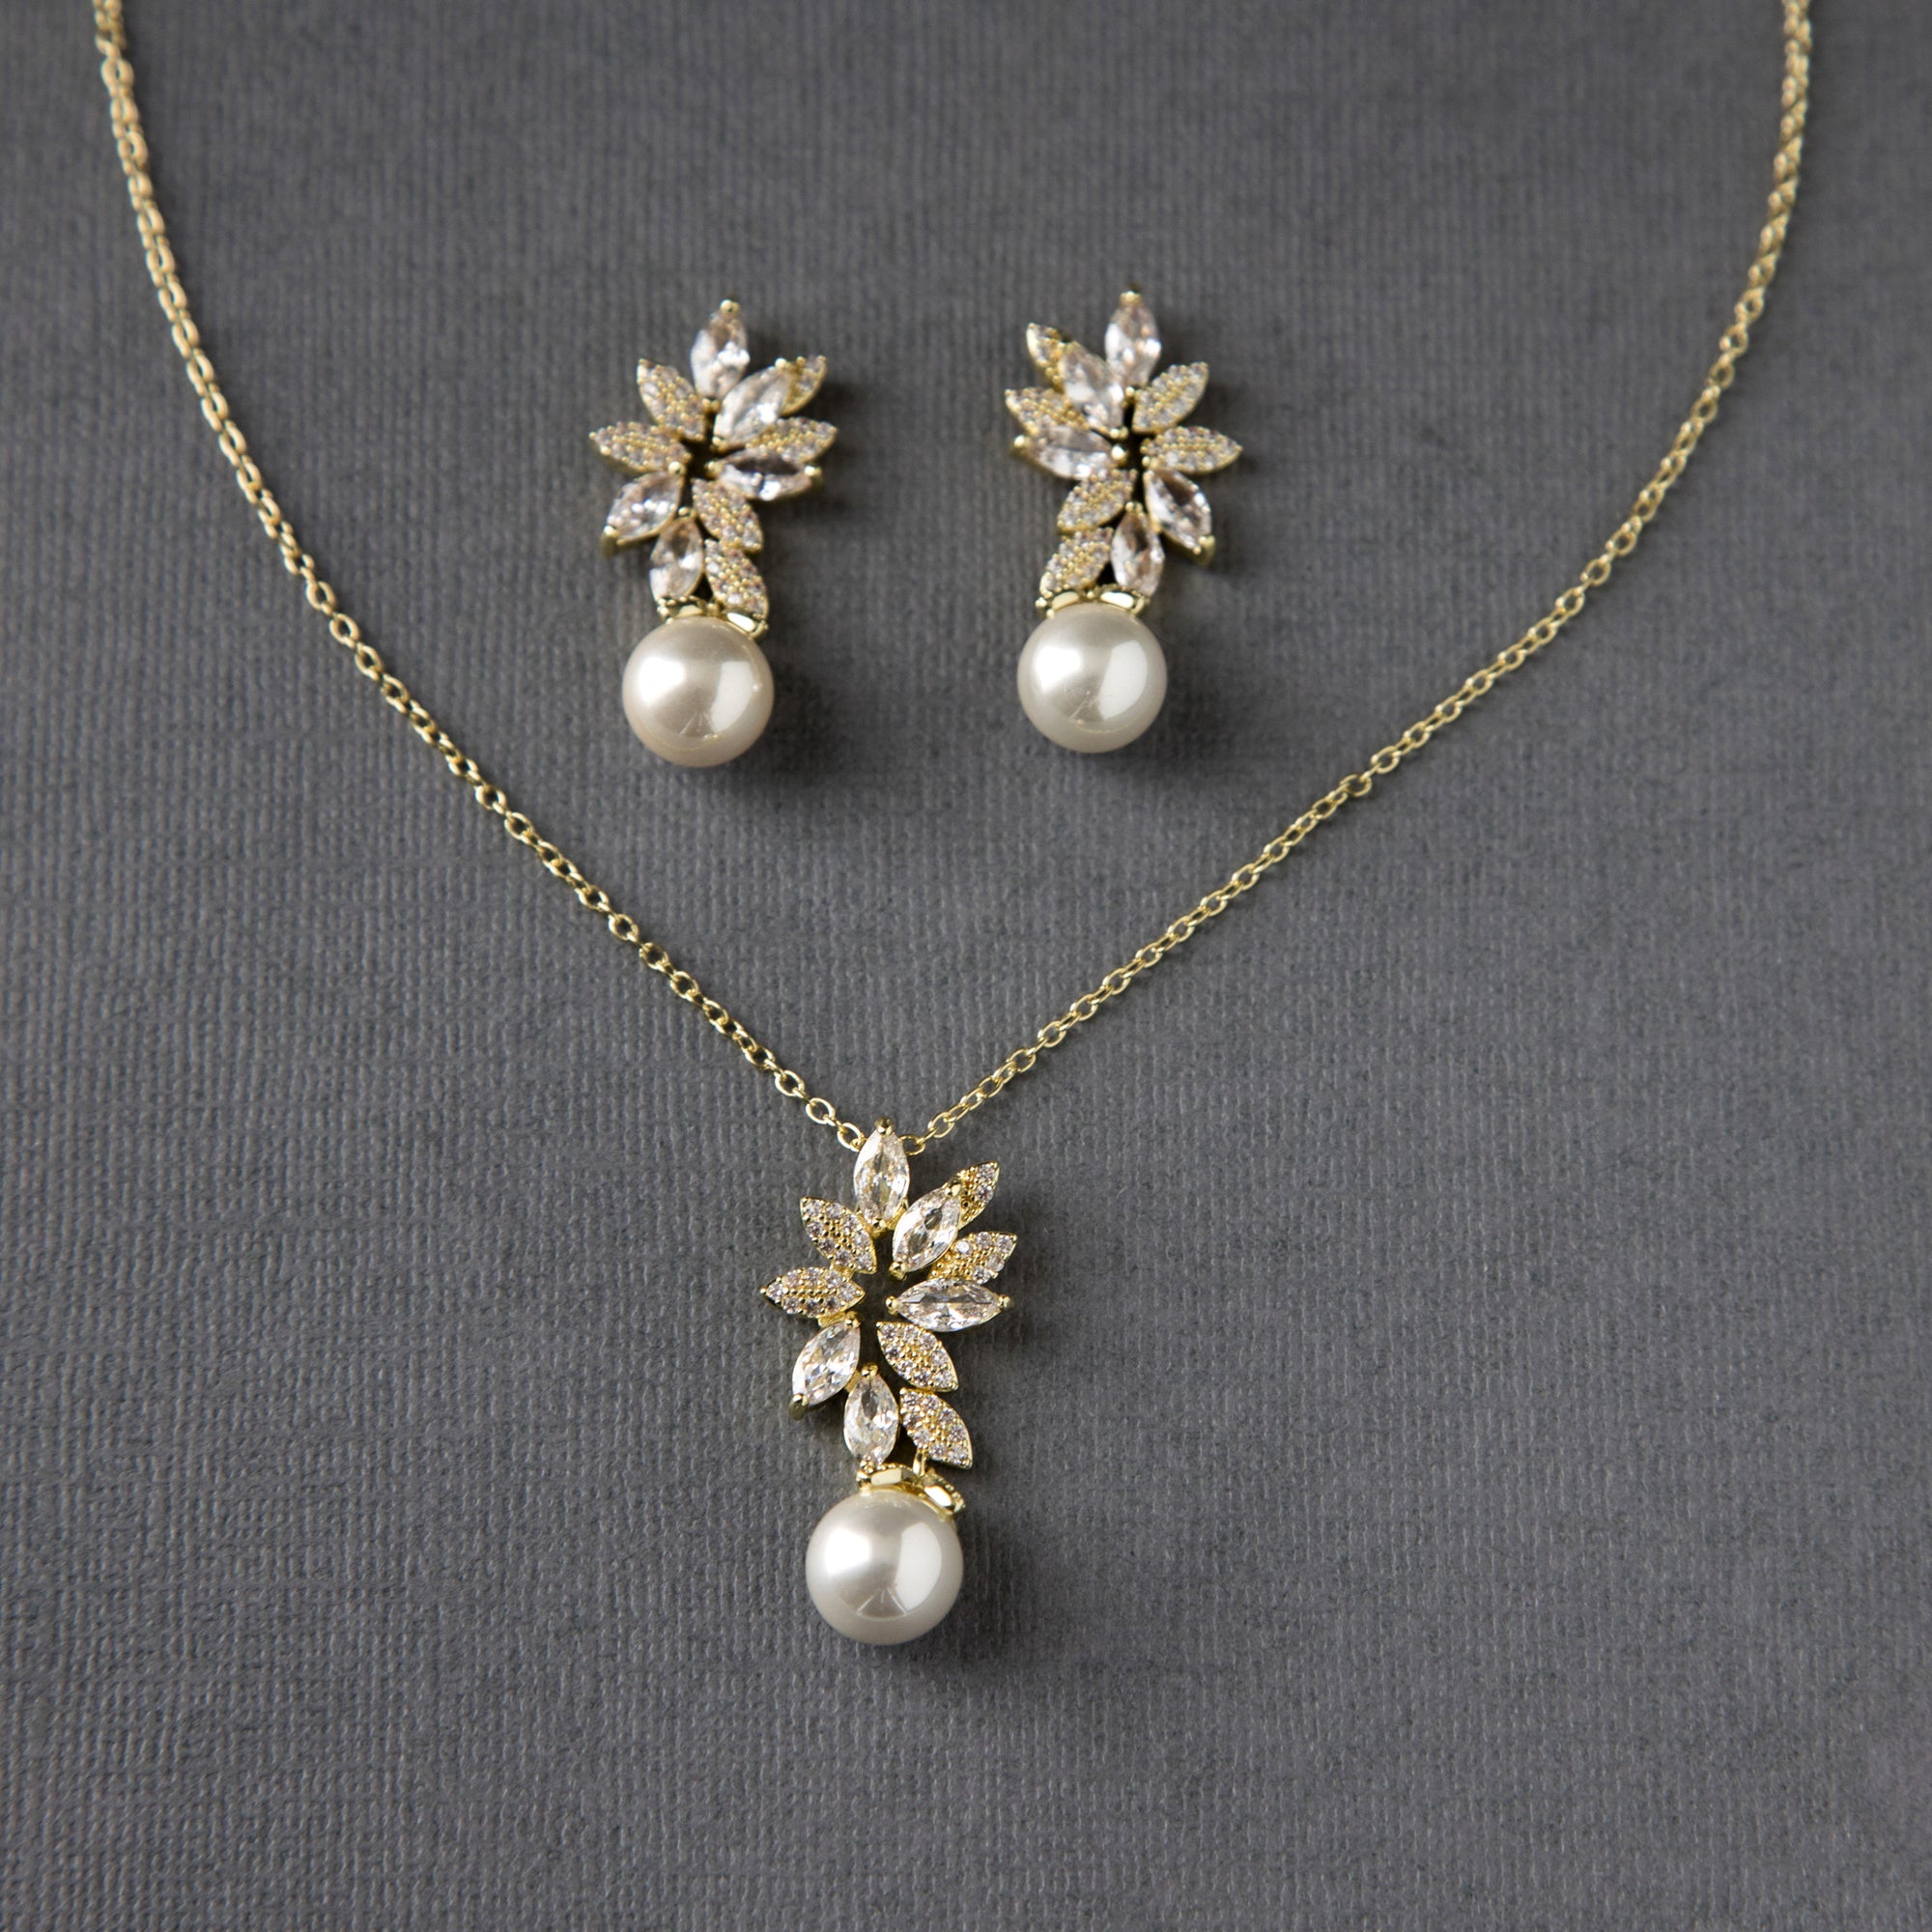 Pearl Pendant Necklace and Earrings Set with CZ Jewels - Cassandra Lynne